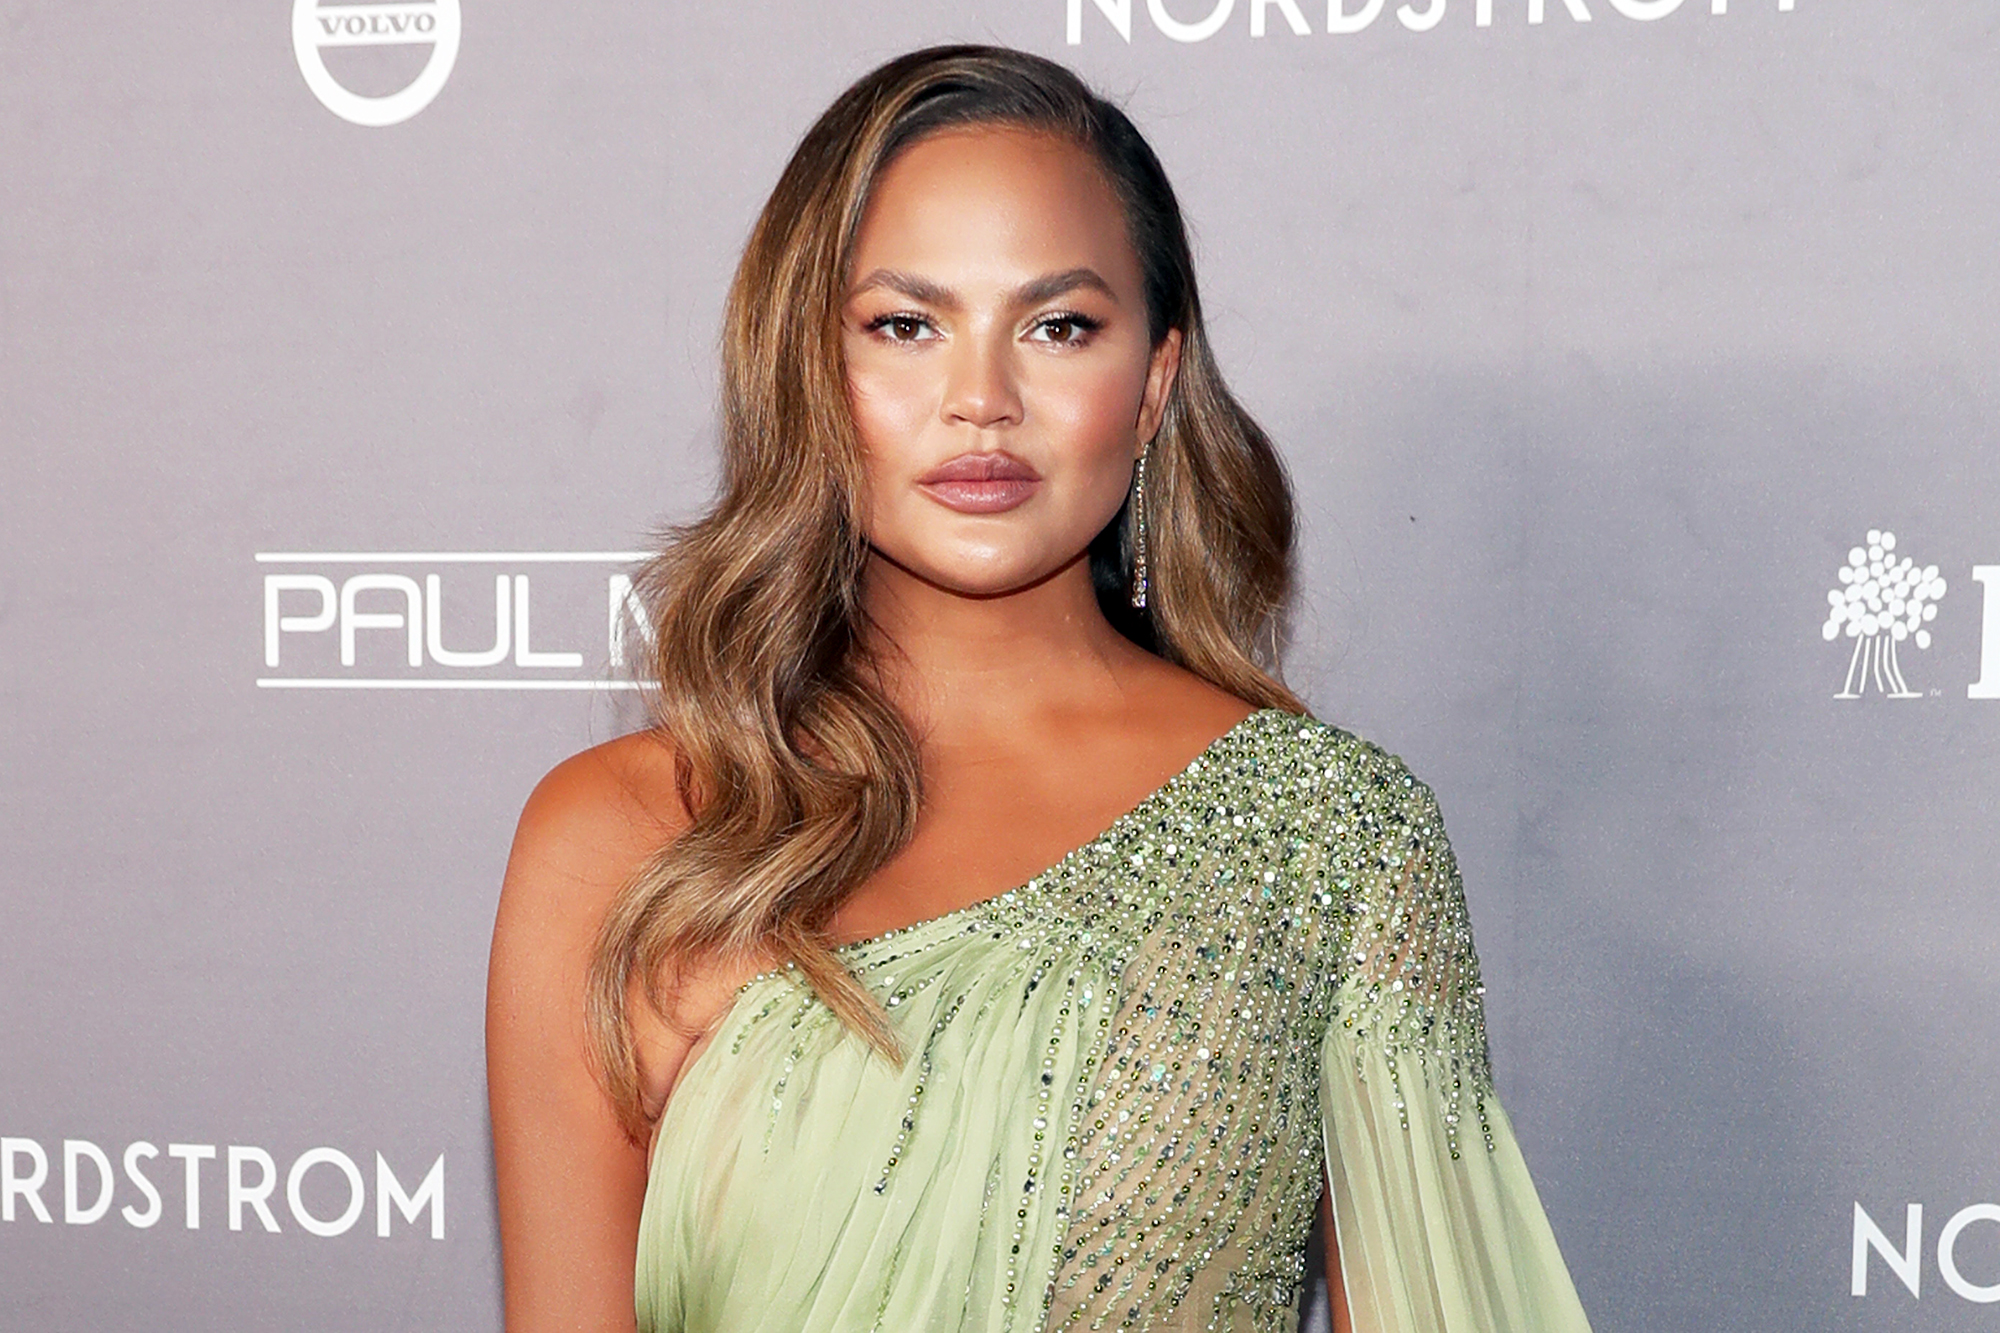 Chrissy Teigen talks about feeling depressed after becoming part of the "cancel club"